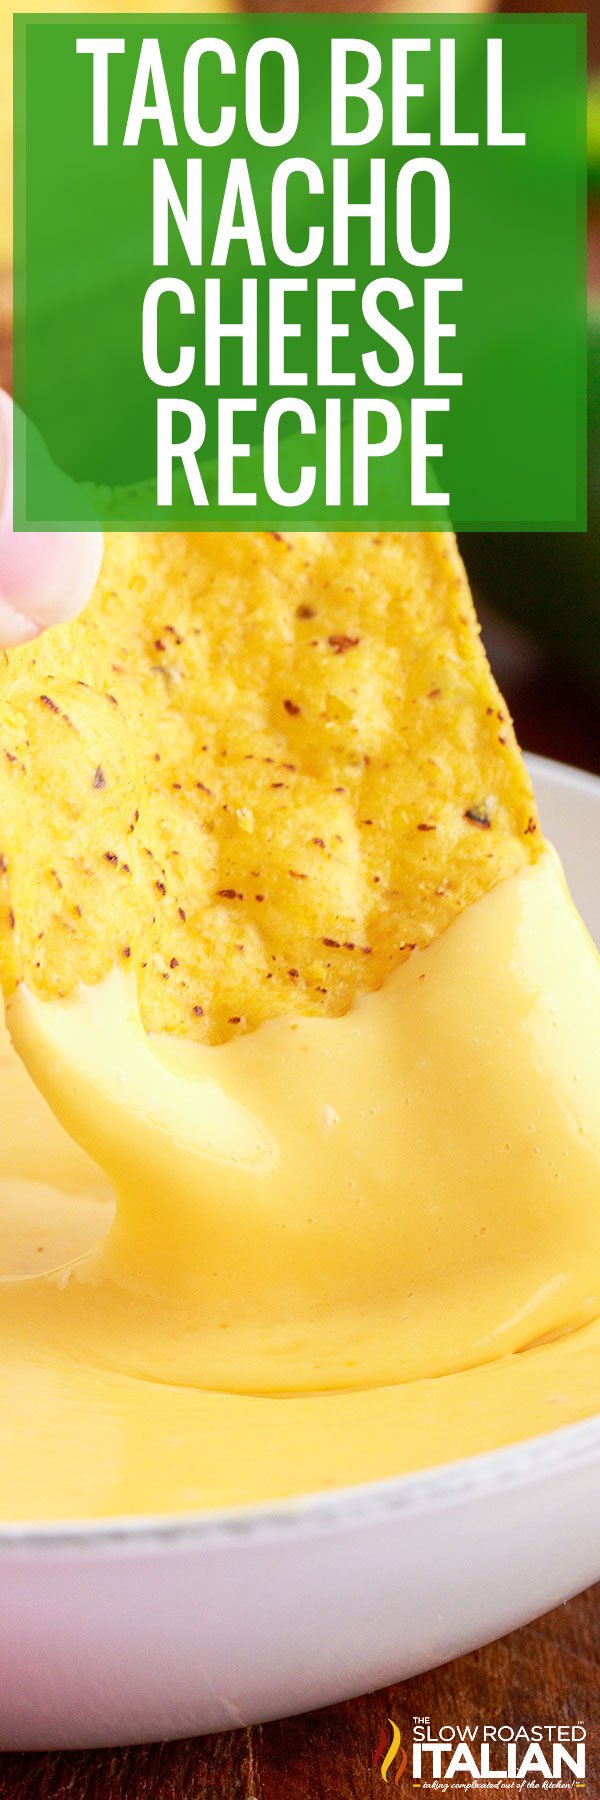 titled image (and shown): taco bell nacho cheese recipe